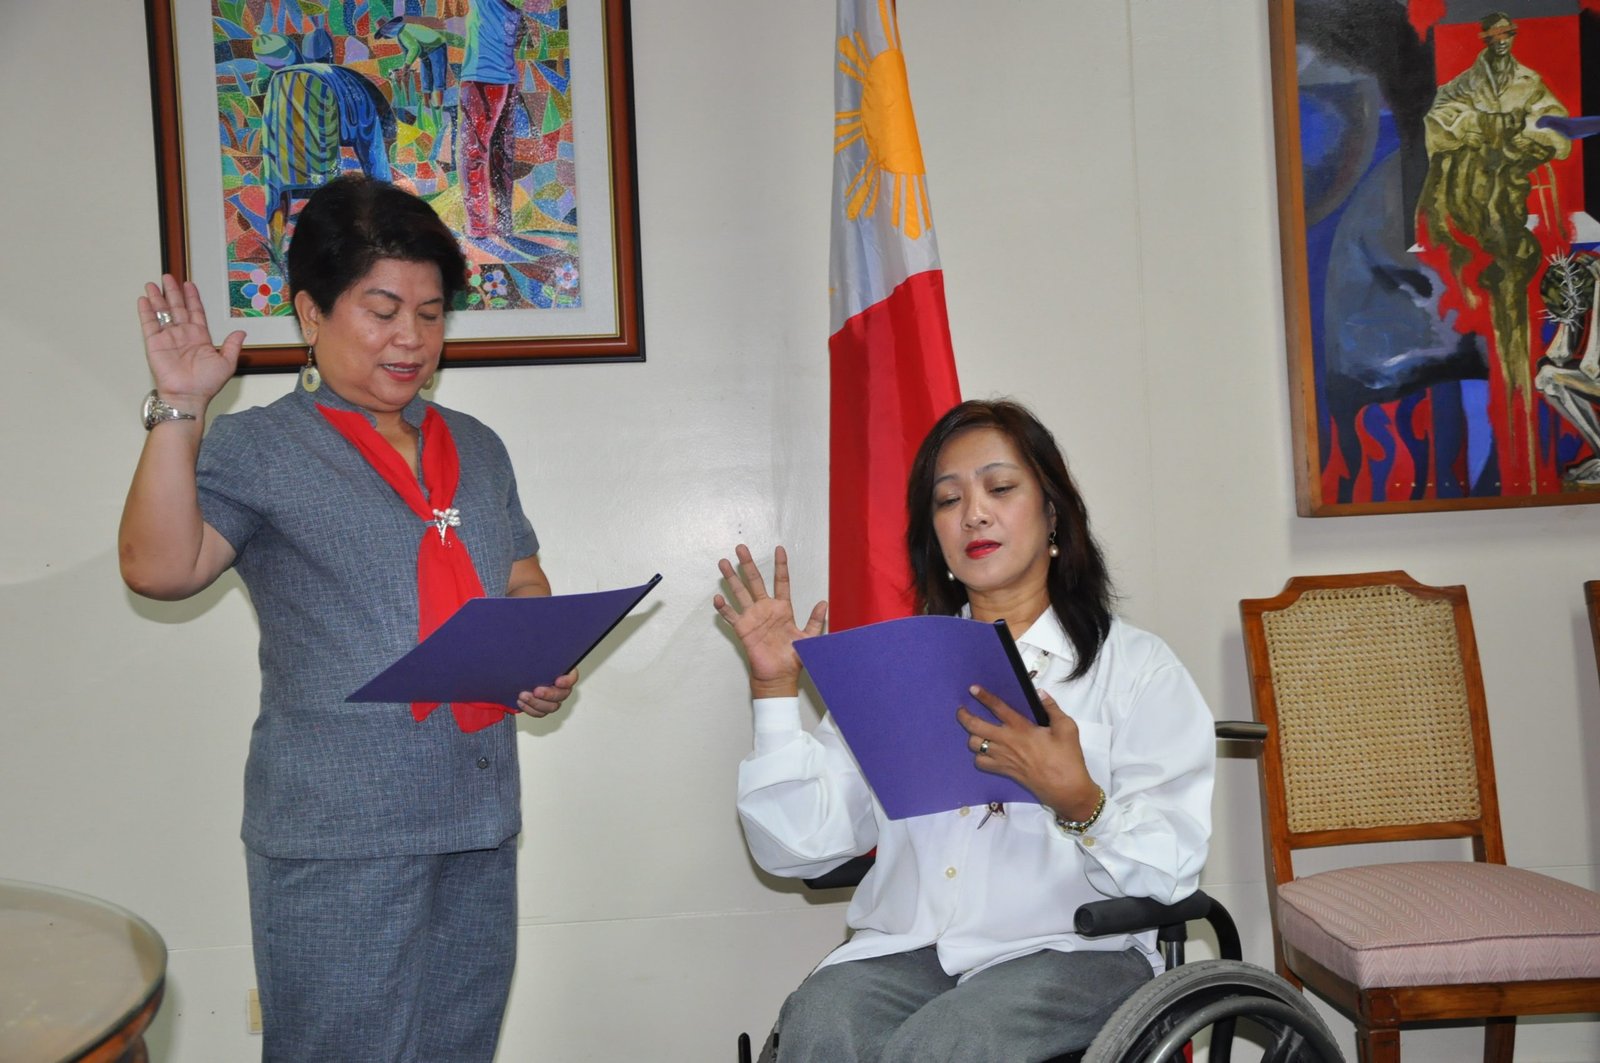 DSWD Secretary Corazon Juliano Soliman administers the oath taking of Ms. Carmen Reyes Zubiaga as the new Acting Executive Director of the National Council on Disability Affairs.